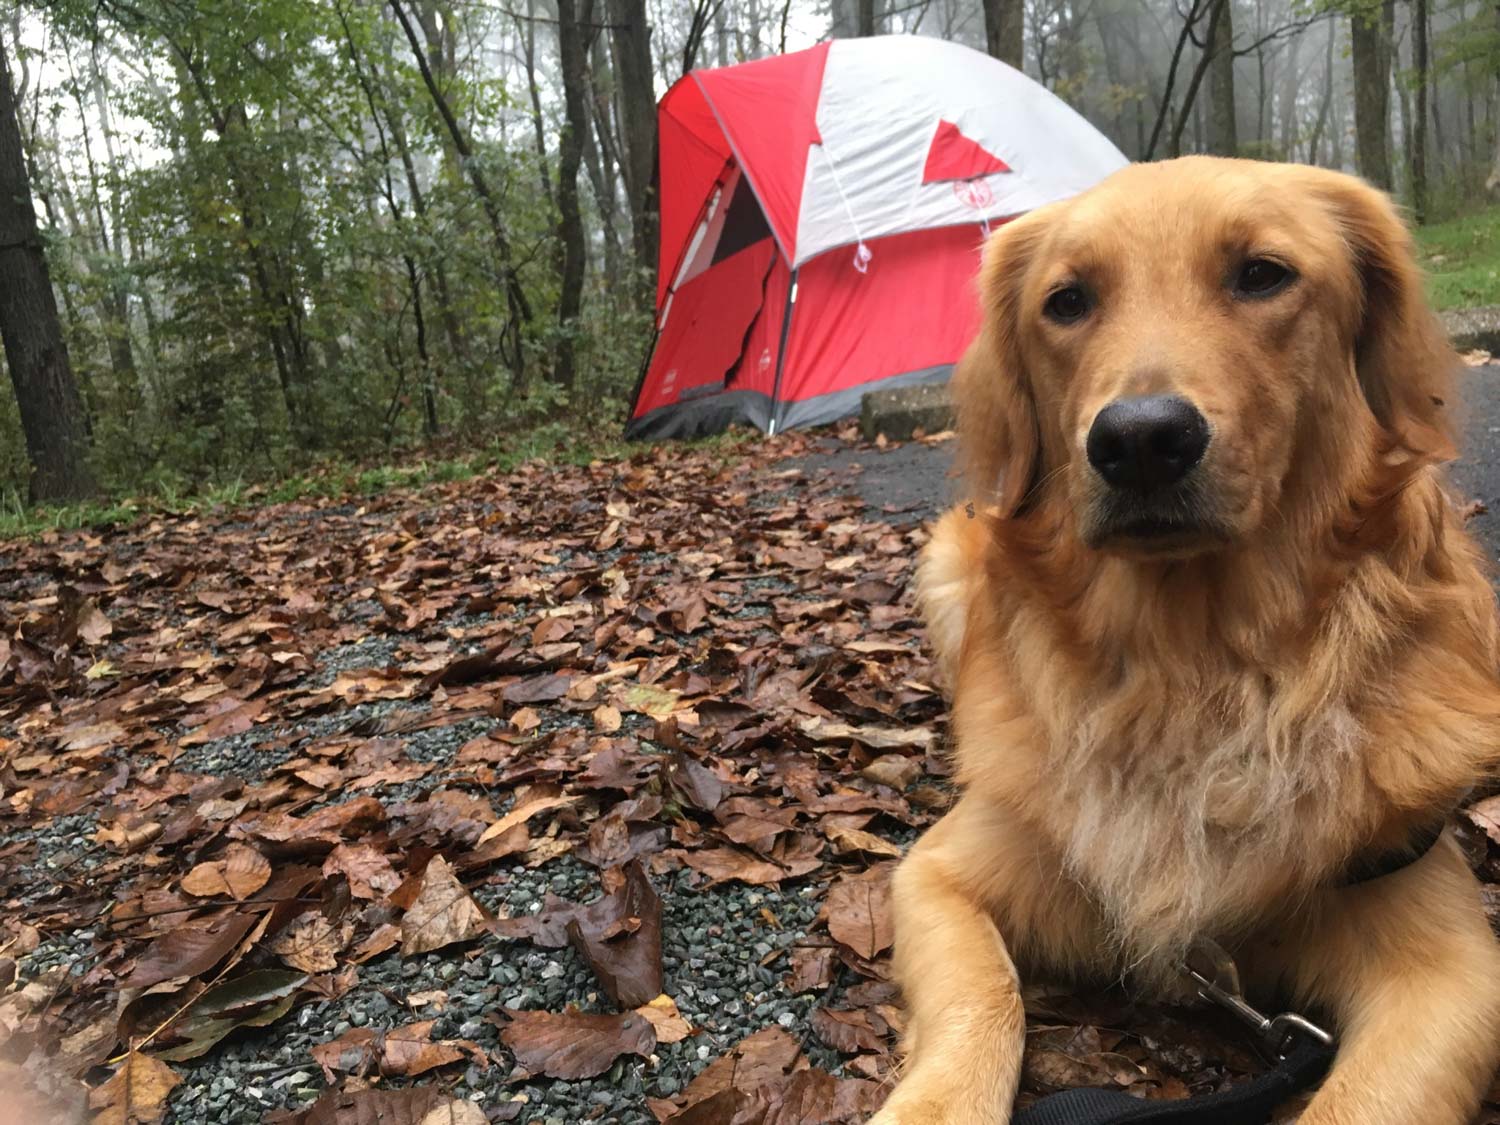 golden retriever in foreground, red and white tent in background at a tree-lined campsite